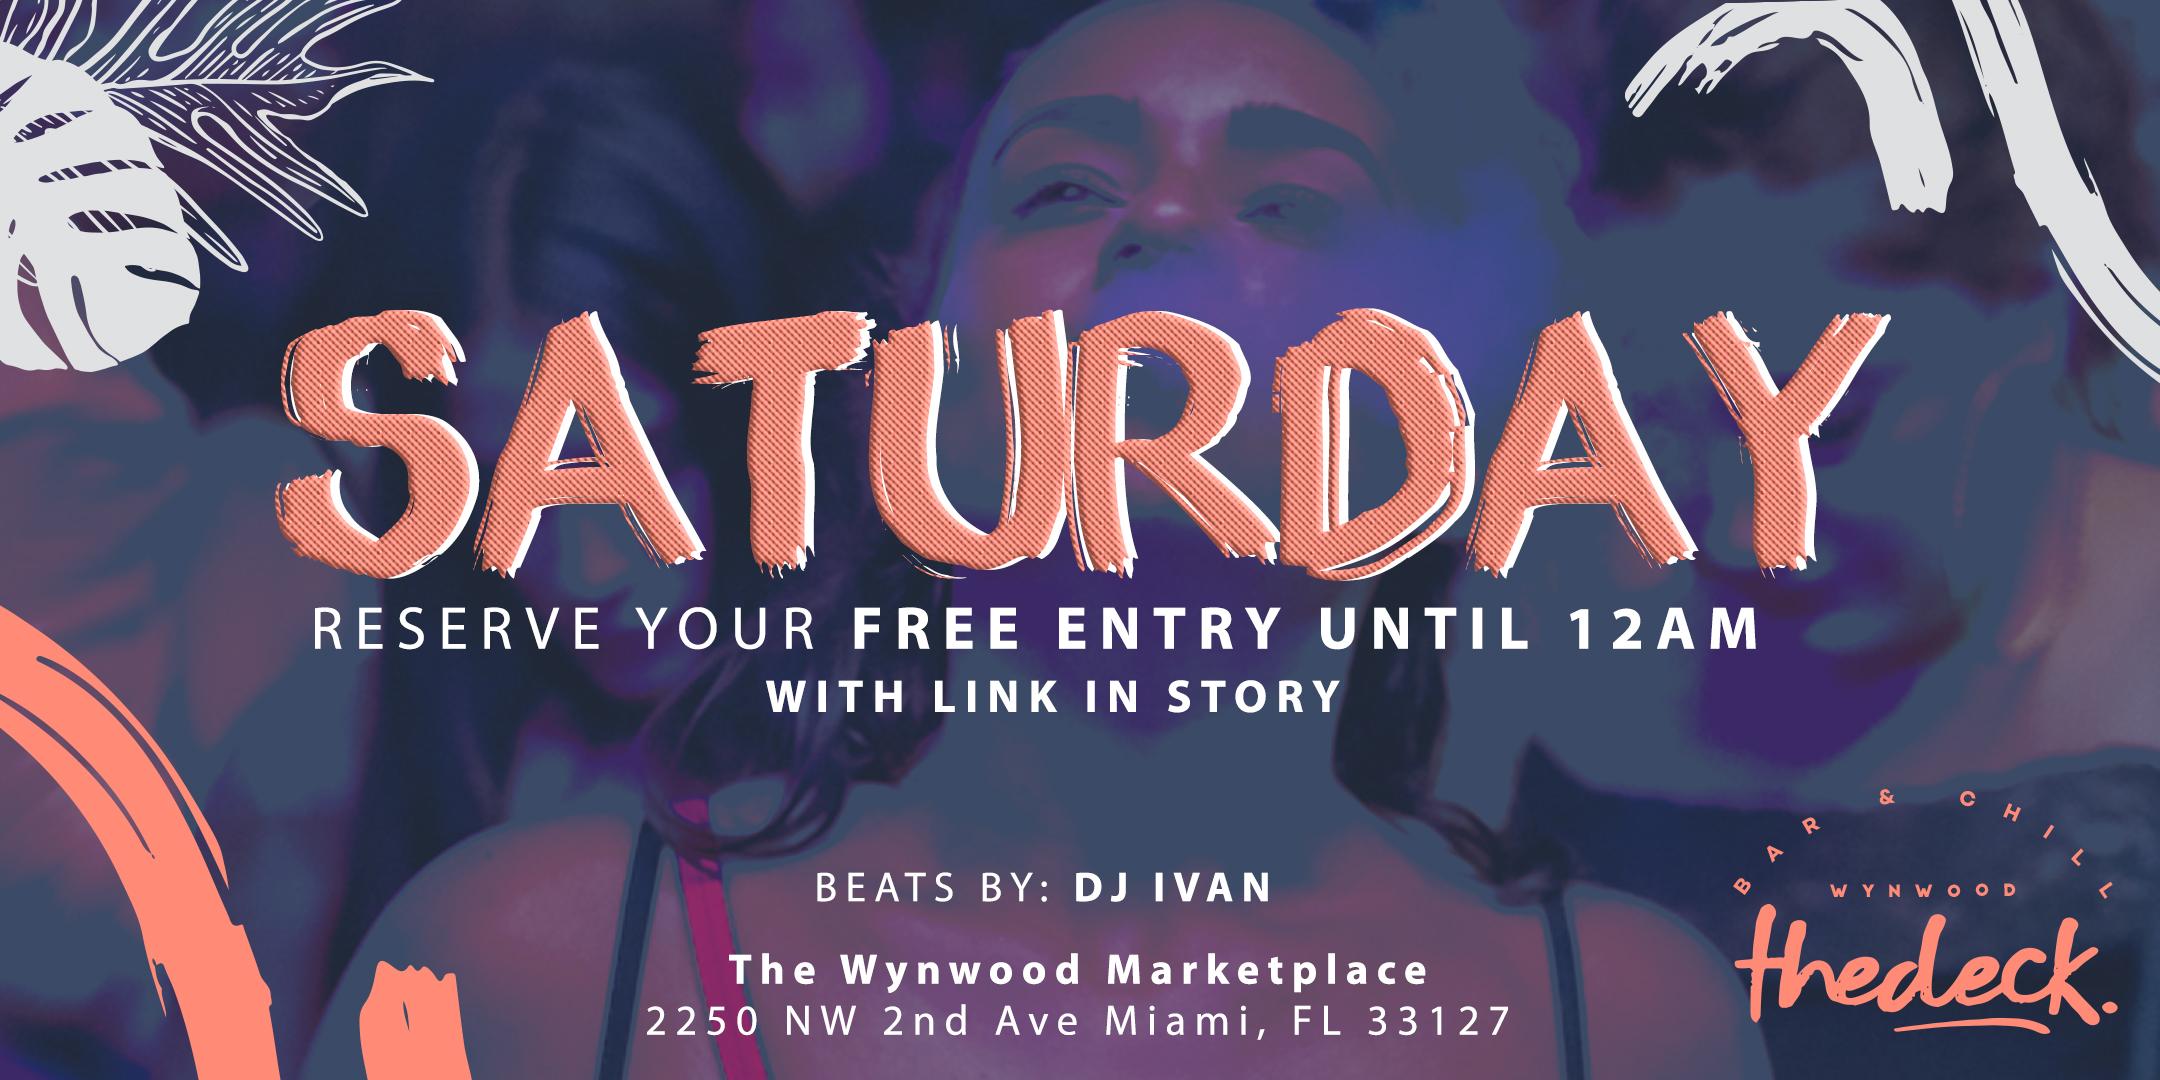 Saturdays at thedeck in The Wynwood Marketplace